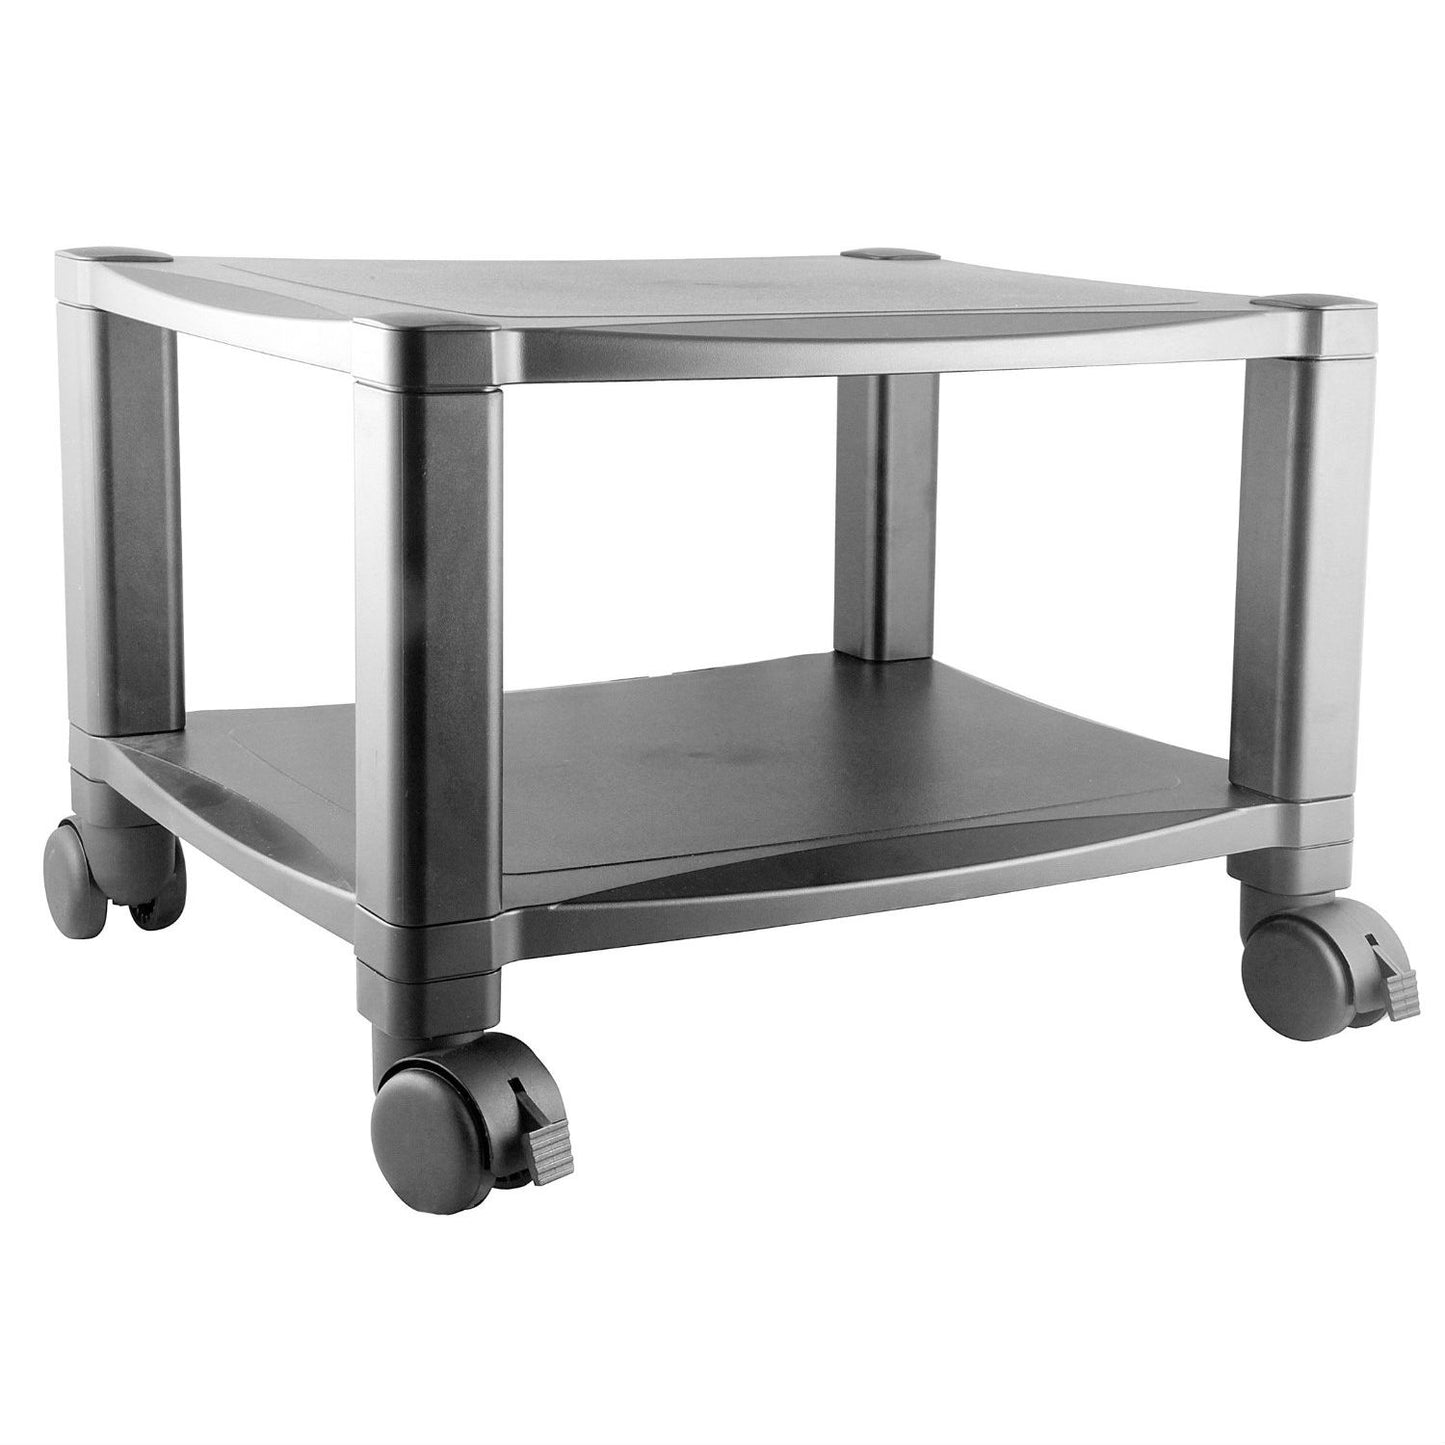 Sturdy 2-Shelf Mobile Printer Stand Cart in Black with Locking Casters